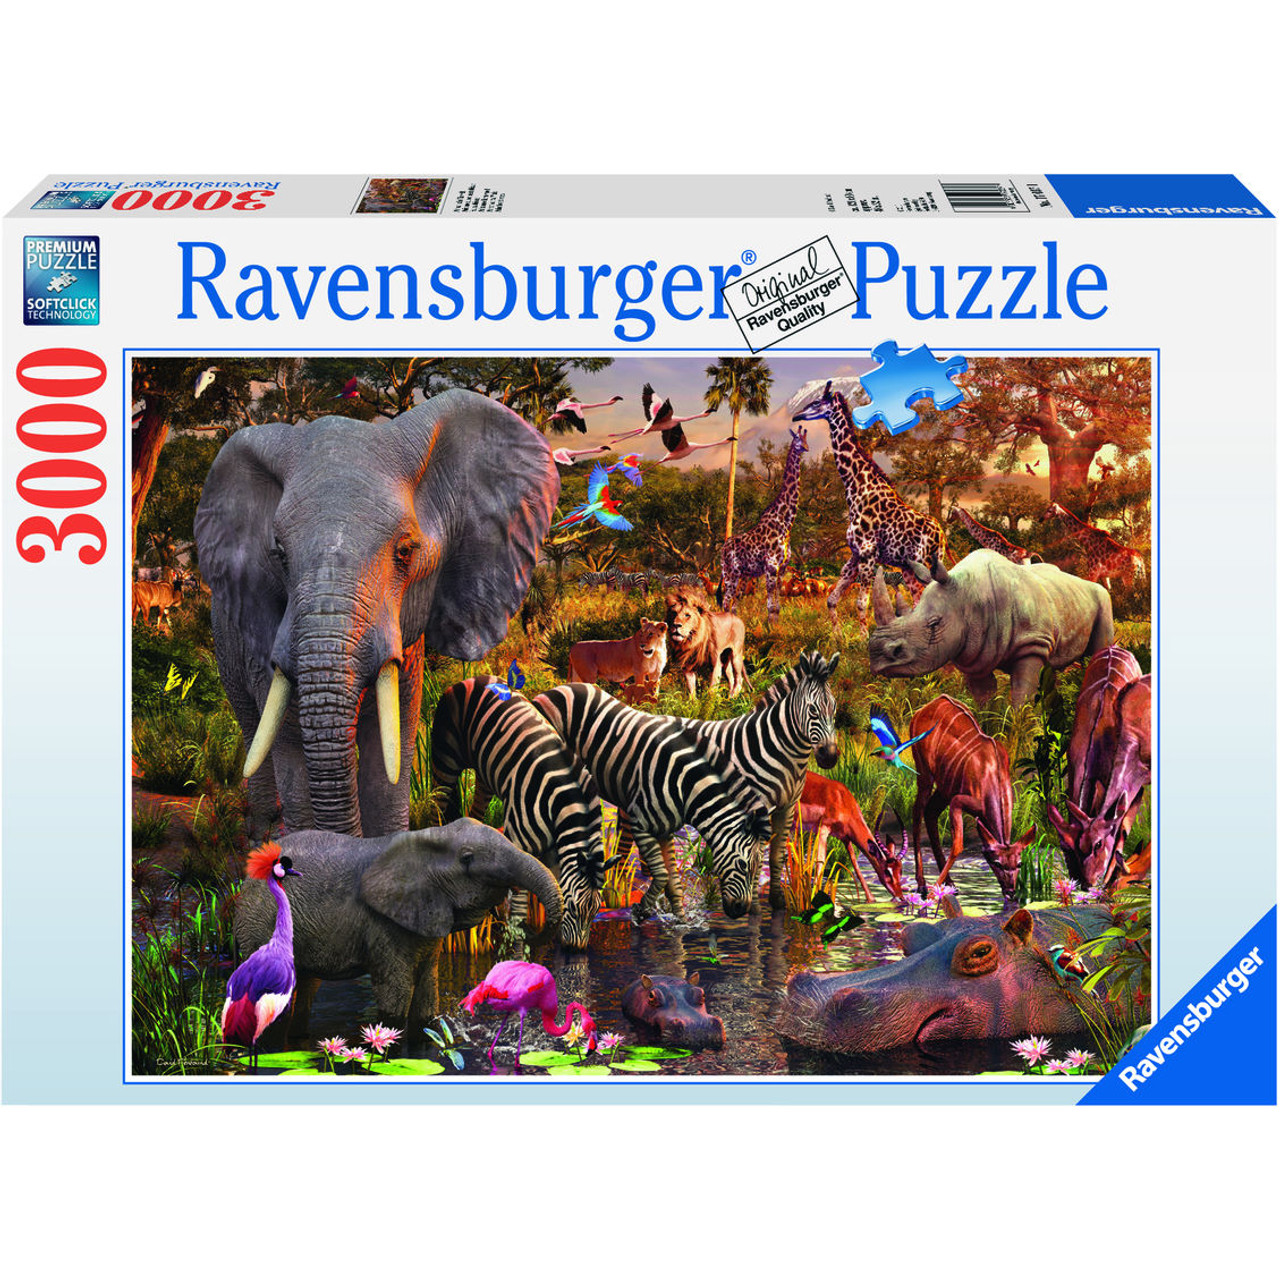 Puzzle Ravensburger The Animal Kingdom of 3000 Pieces 